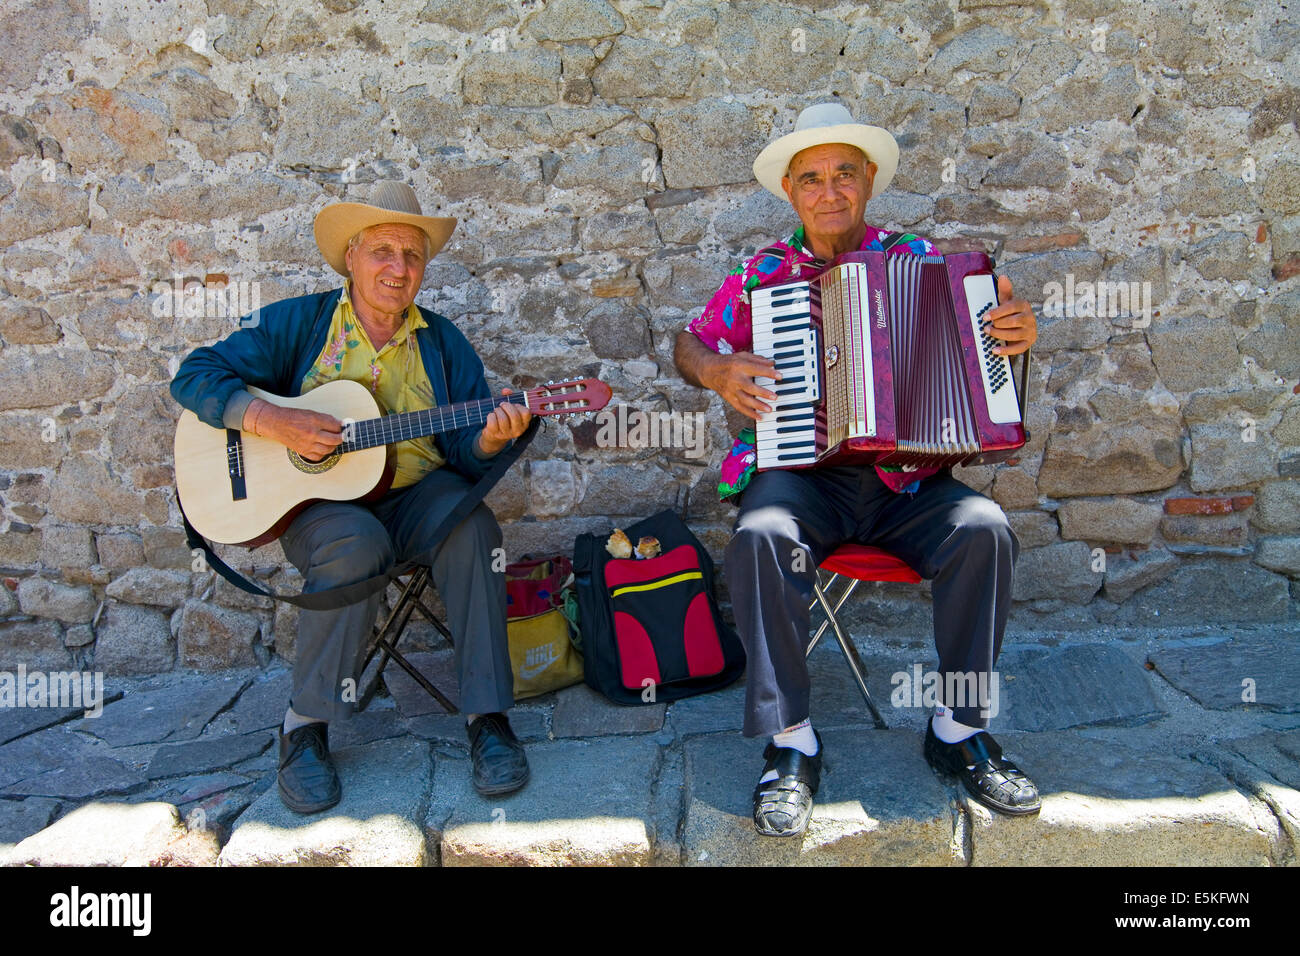 In formal portrait of two street musicians playing a guitar and an accordion in Plovdiv, Bulgaria Stock Photo